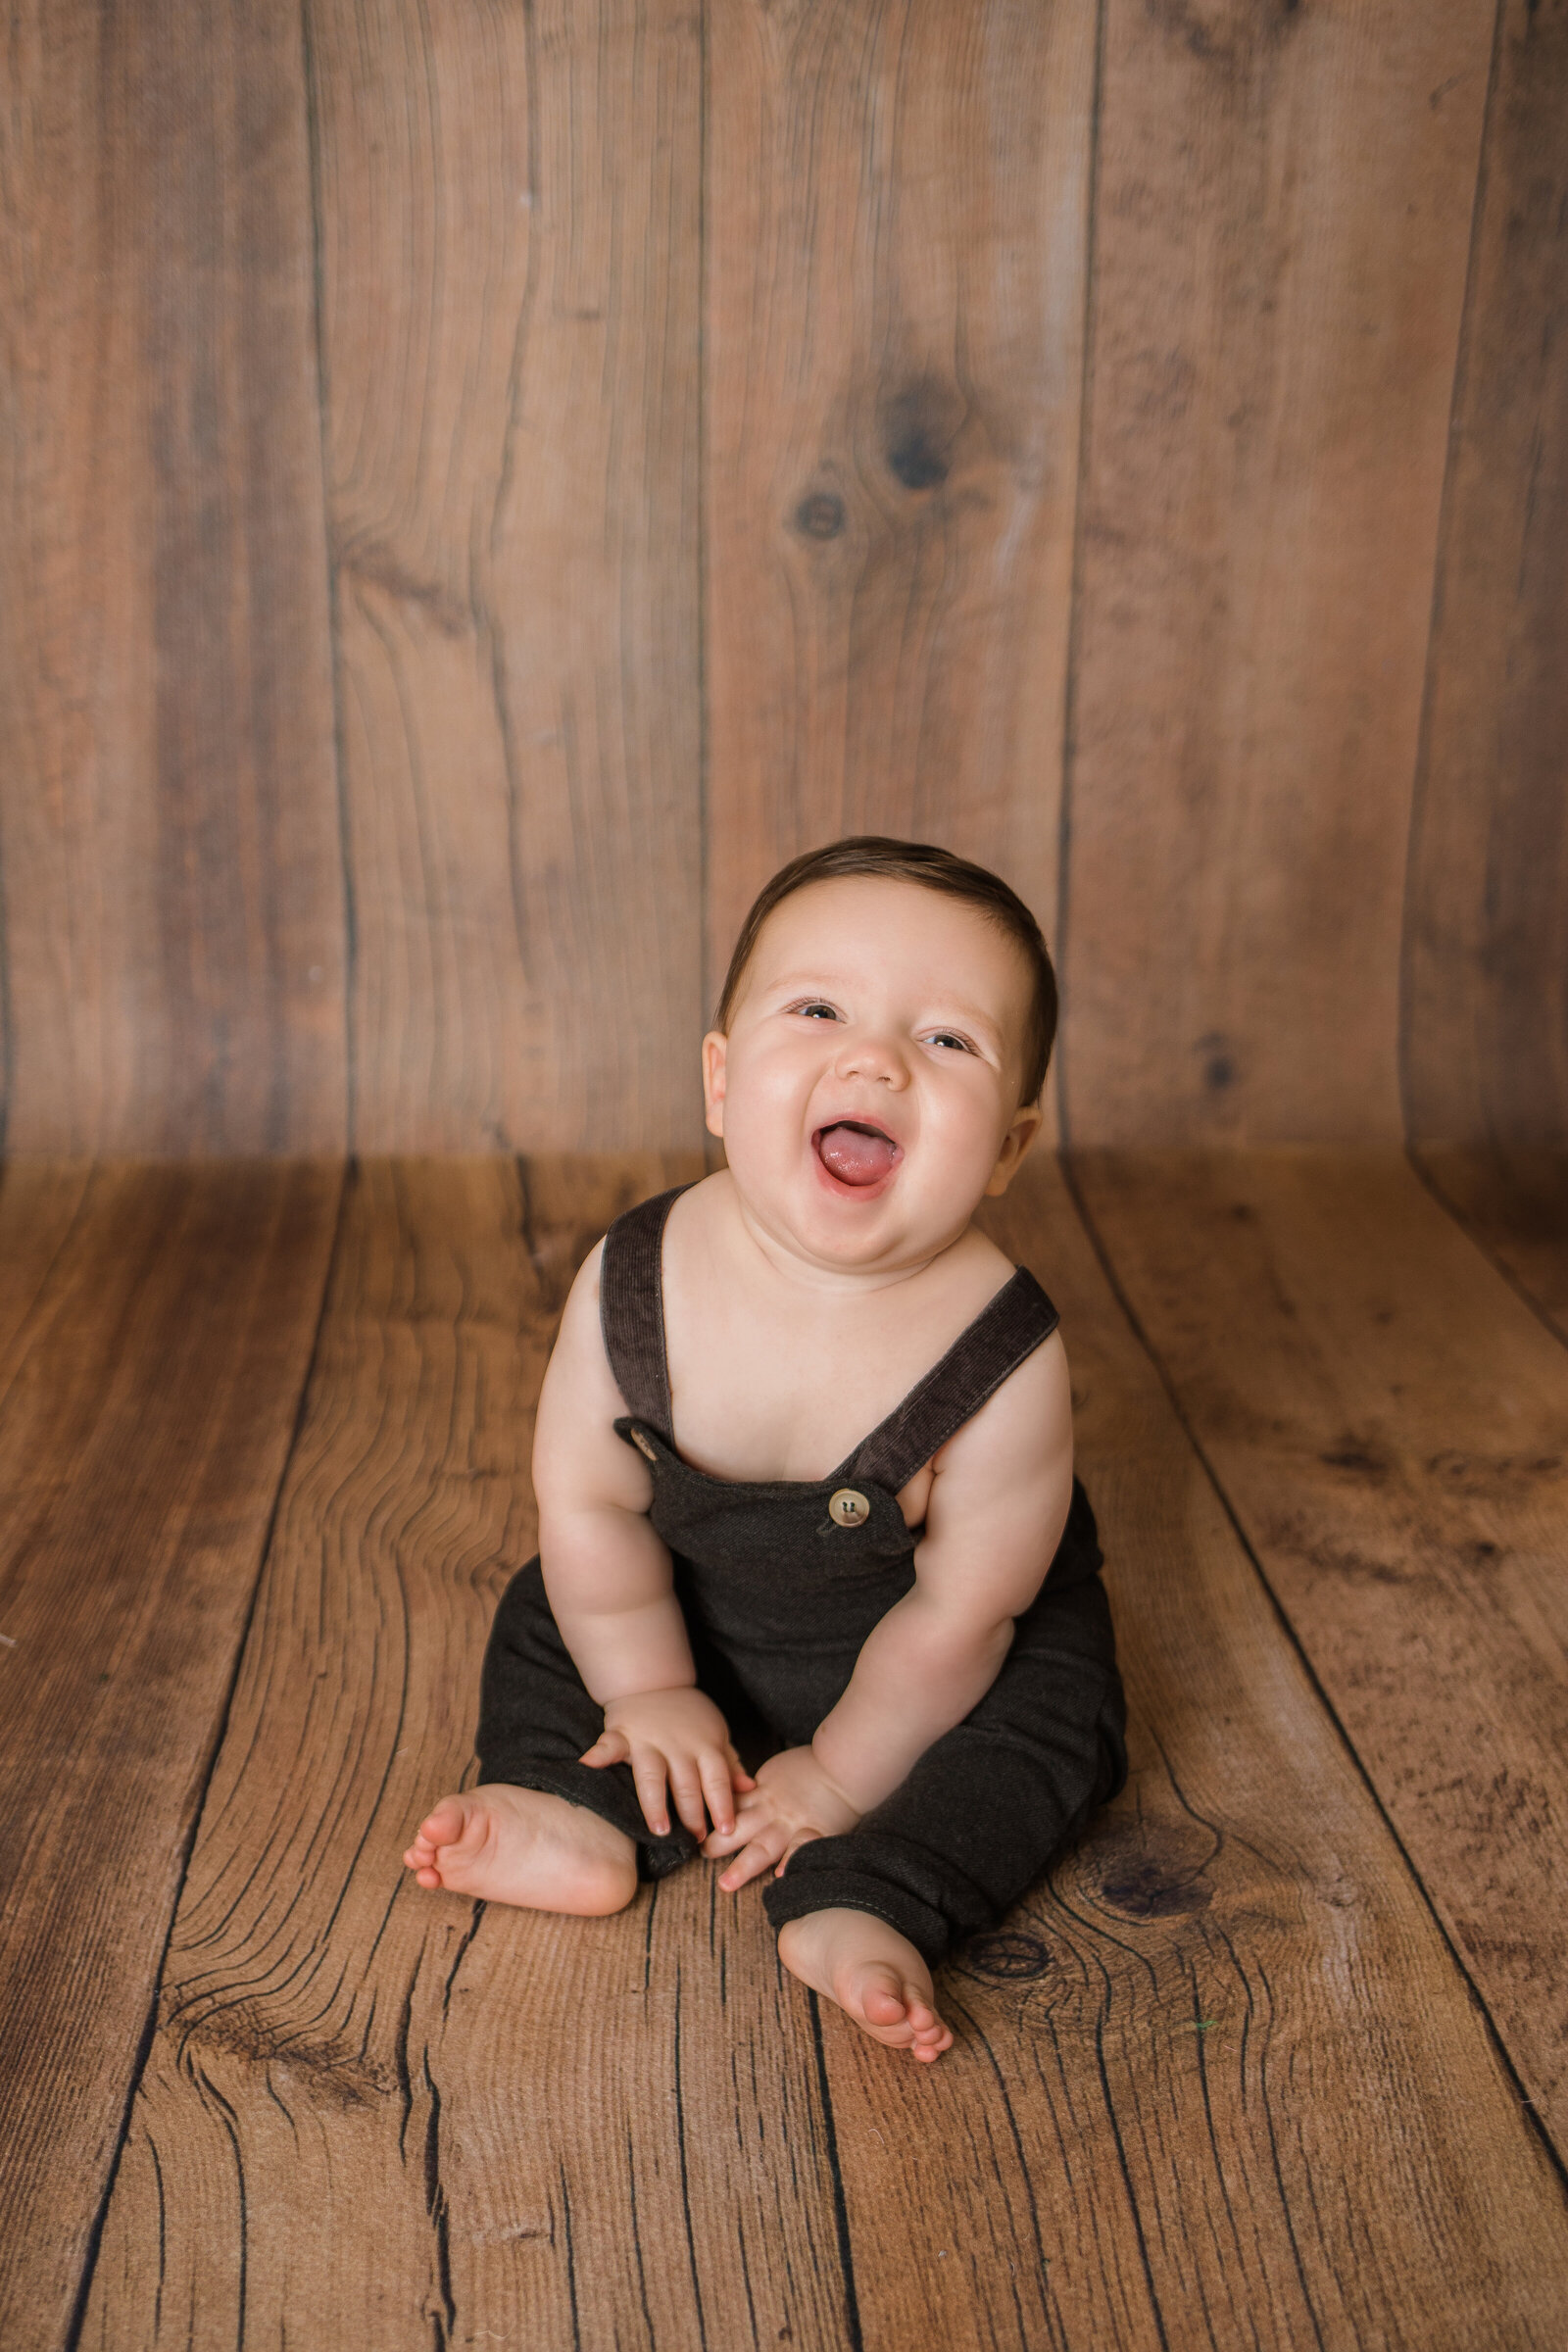 Milestone Photographer, a baby sits up on a wooden floor and has a big smile